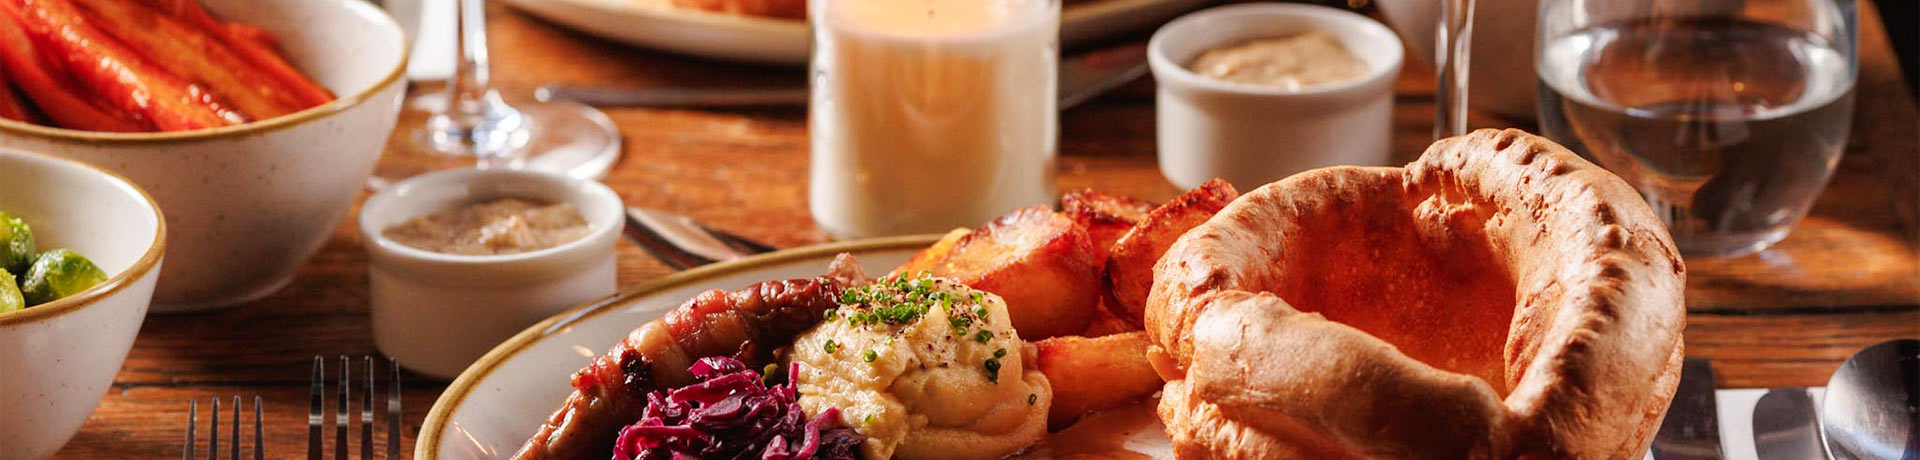 Best pubs for a Sunday roast in Dorset